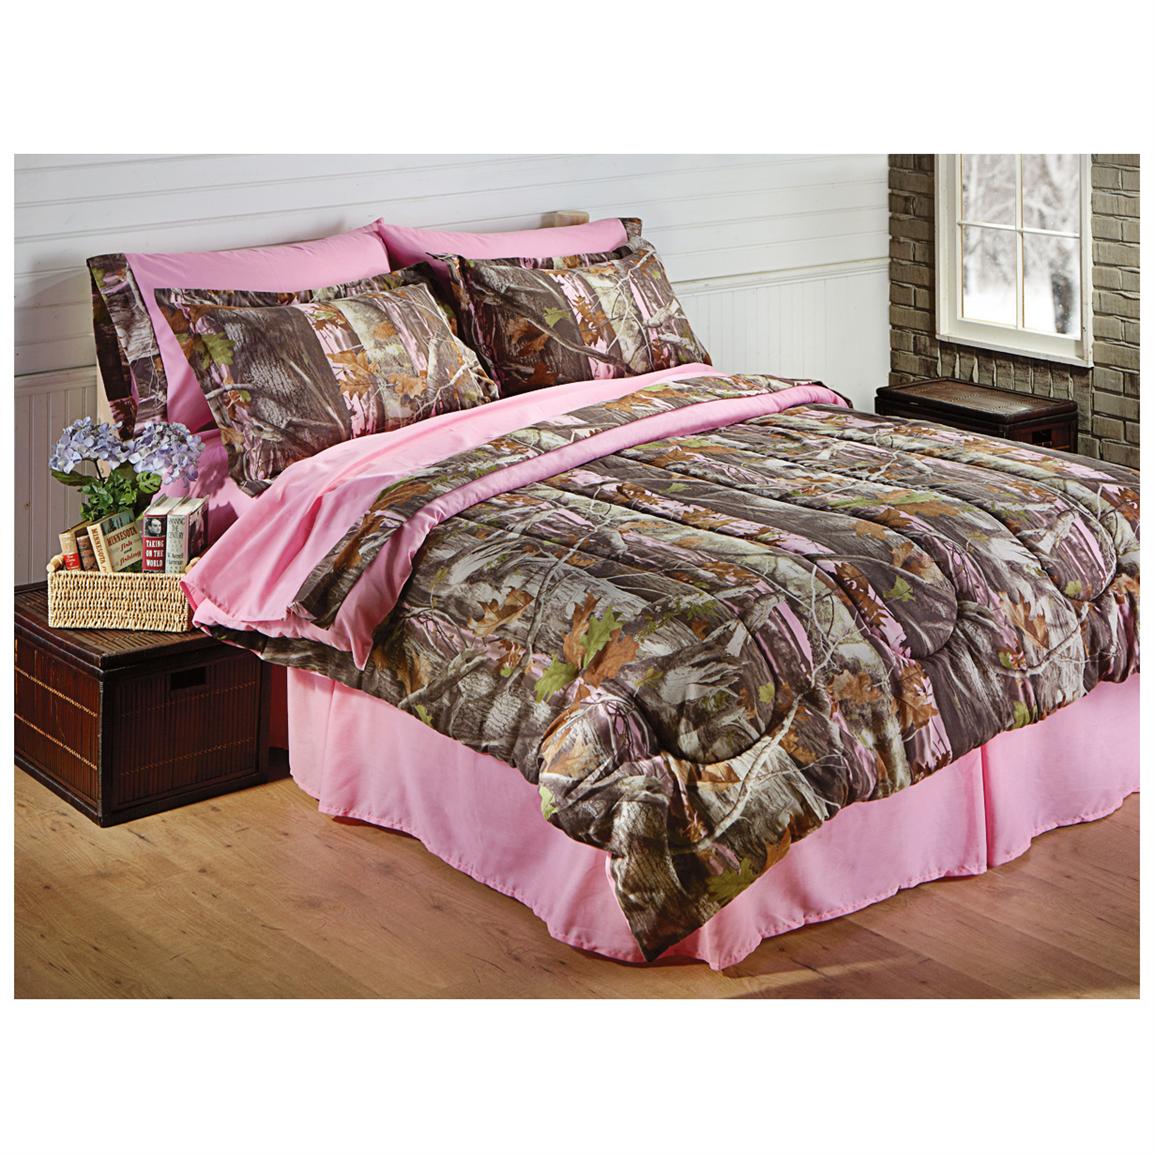 CASTLECREEK™ Next Pink Bed Set - 297740, Comforters, Sets & Collections at Sportsman&#39;s Guide